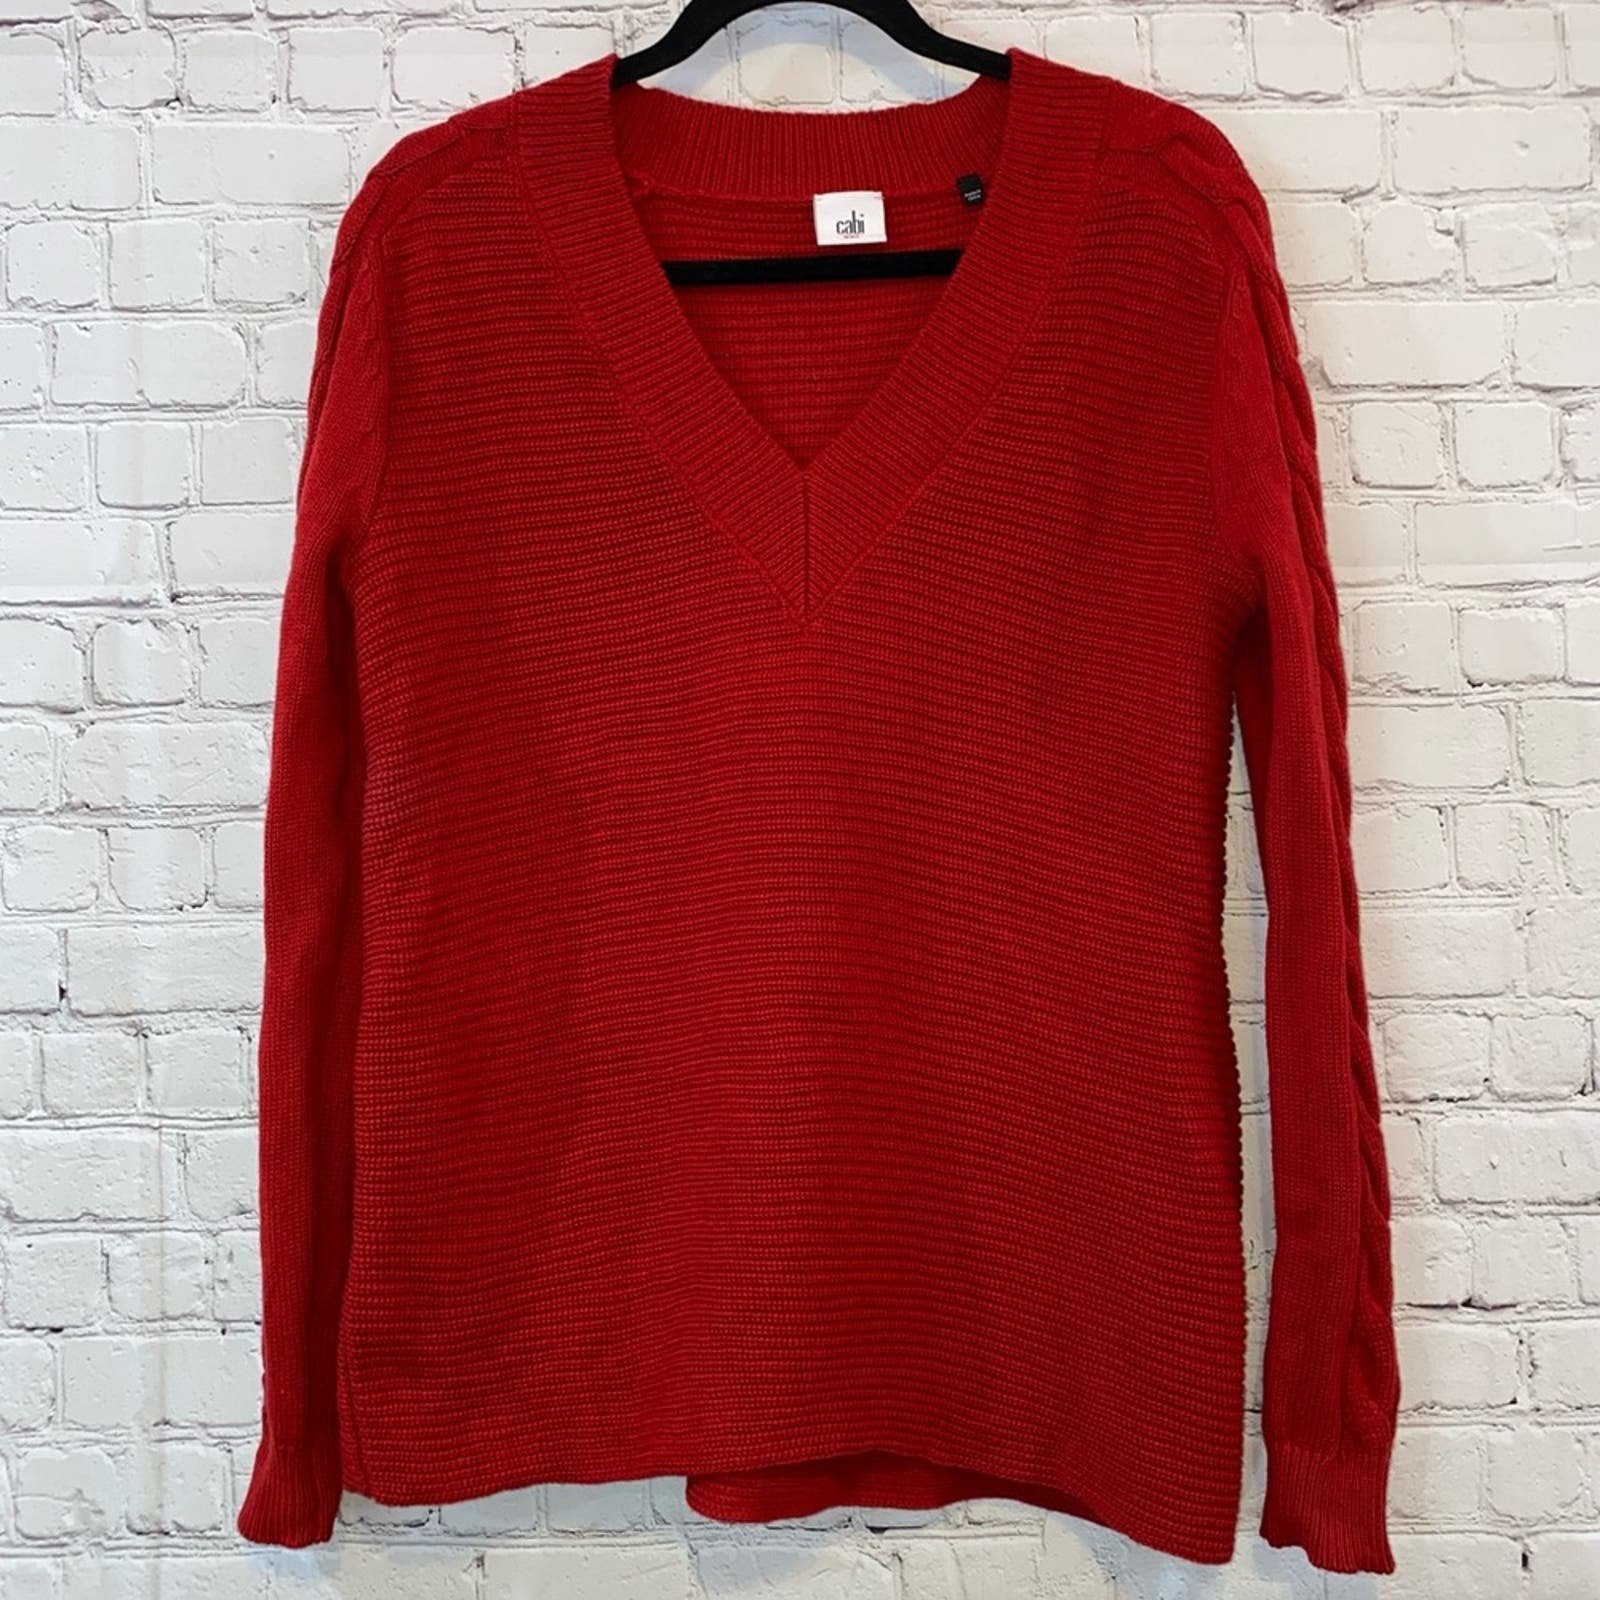 Popular Cabi Red Standout Pullover Cable Knit Ribbed Cotton V Neck Sweater pNMv3PP0h Everyday Low Prices